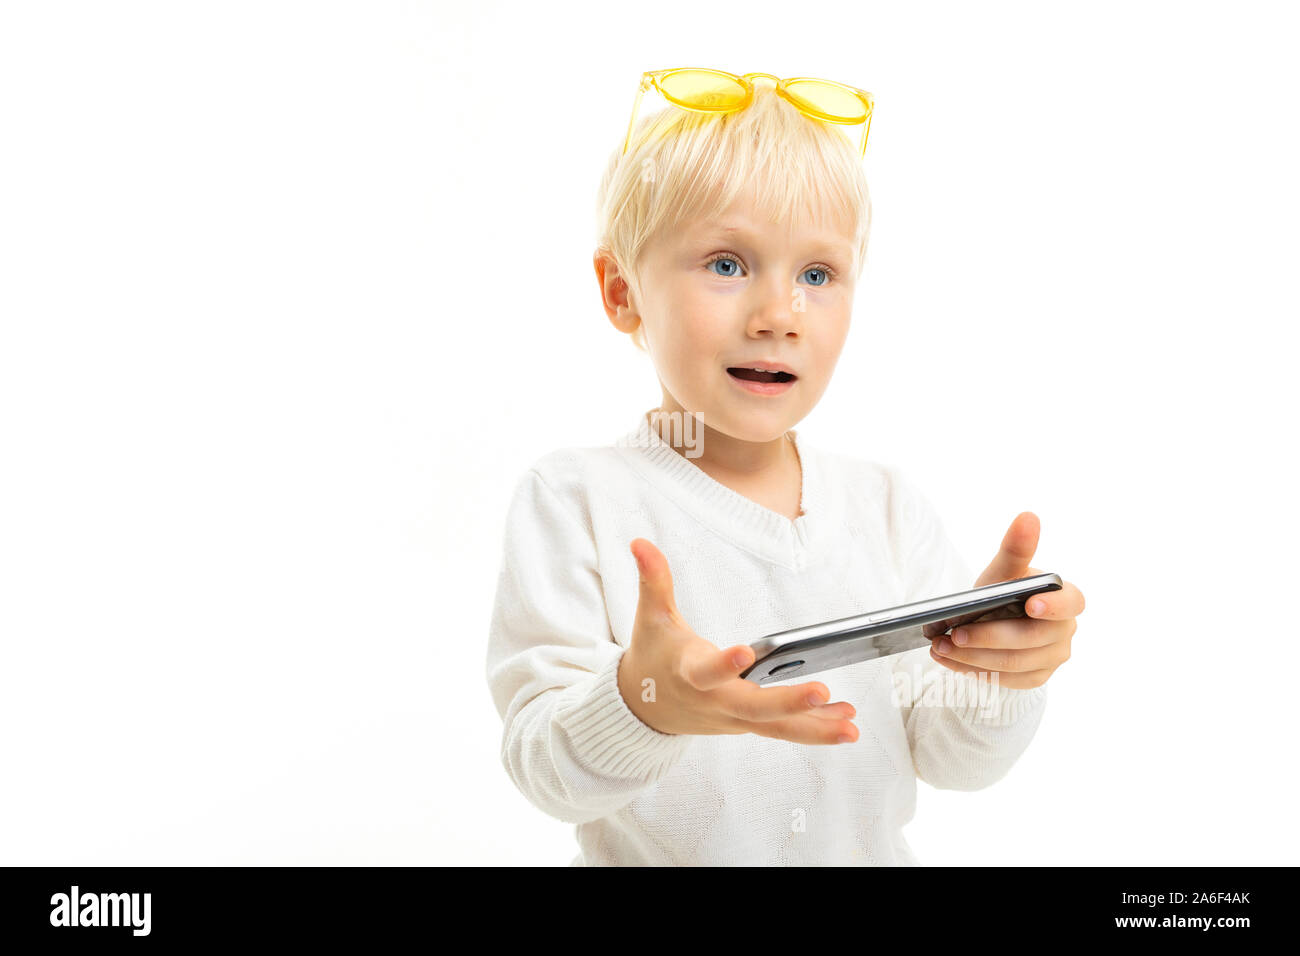 Little boy with short blond hair, blue eyes, cute appearance, in white jacket, light blue pants, stands with yellow glasses and looks into the phone Stock Photo